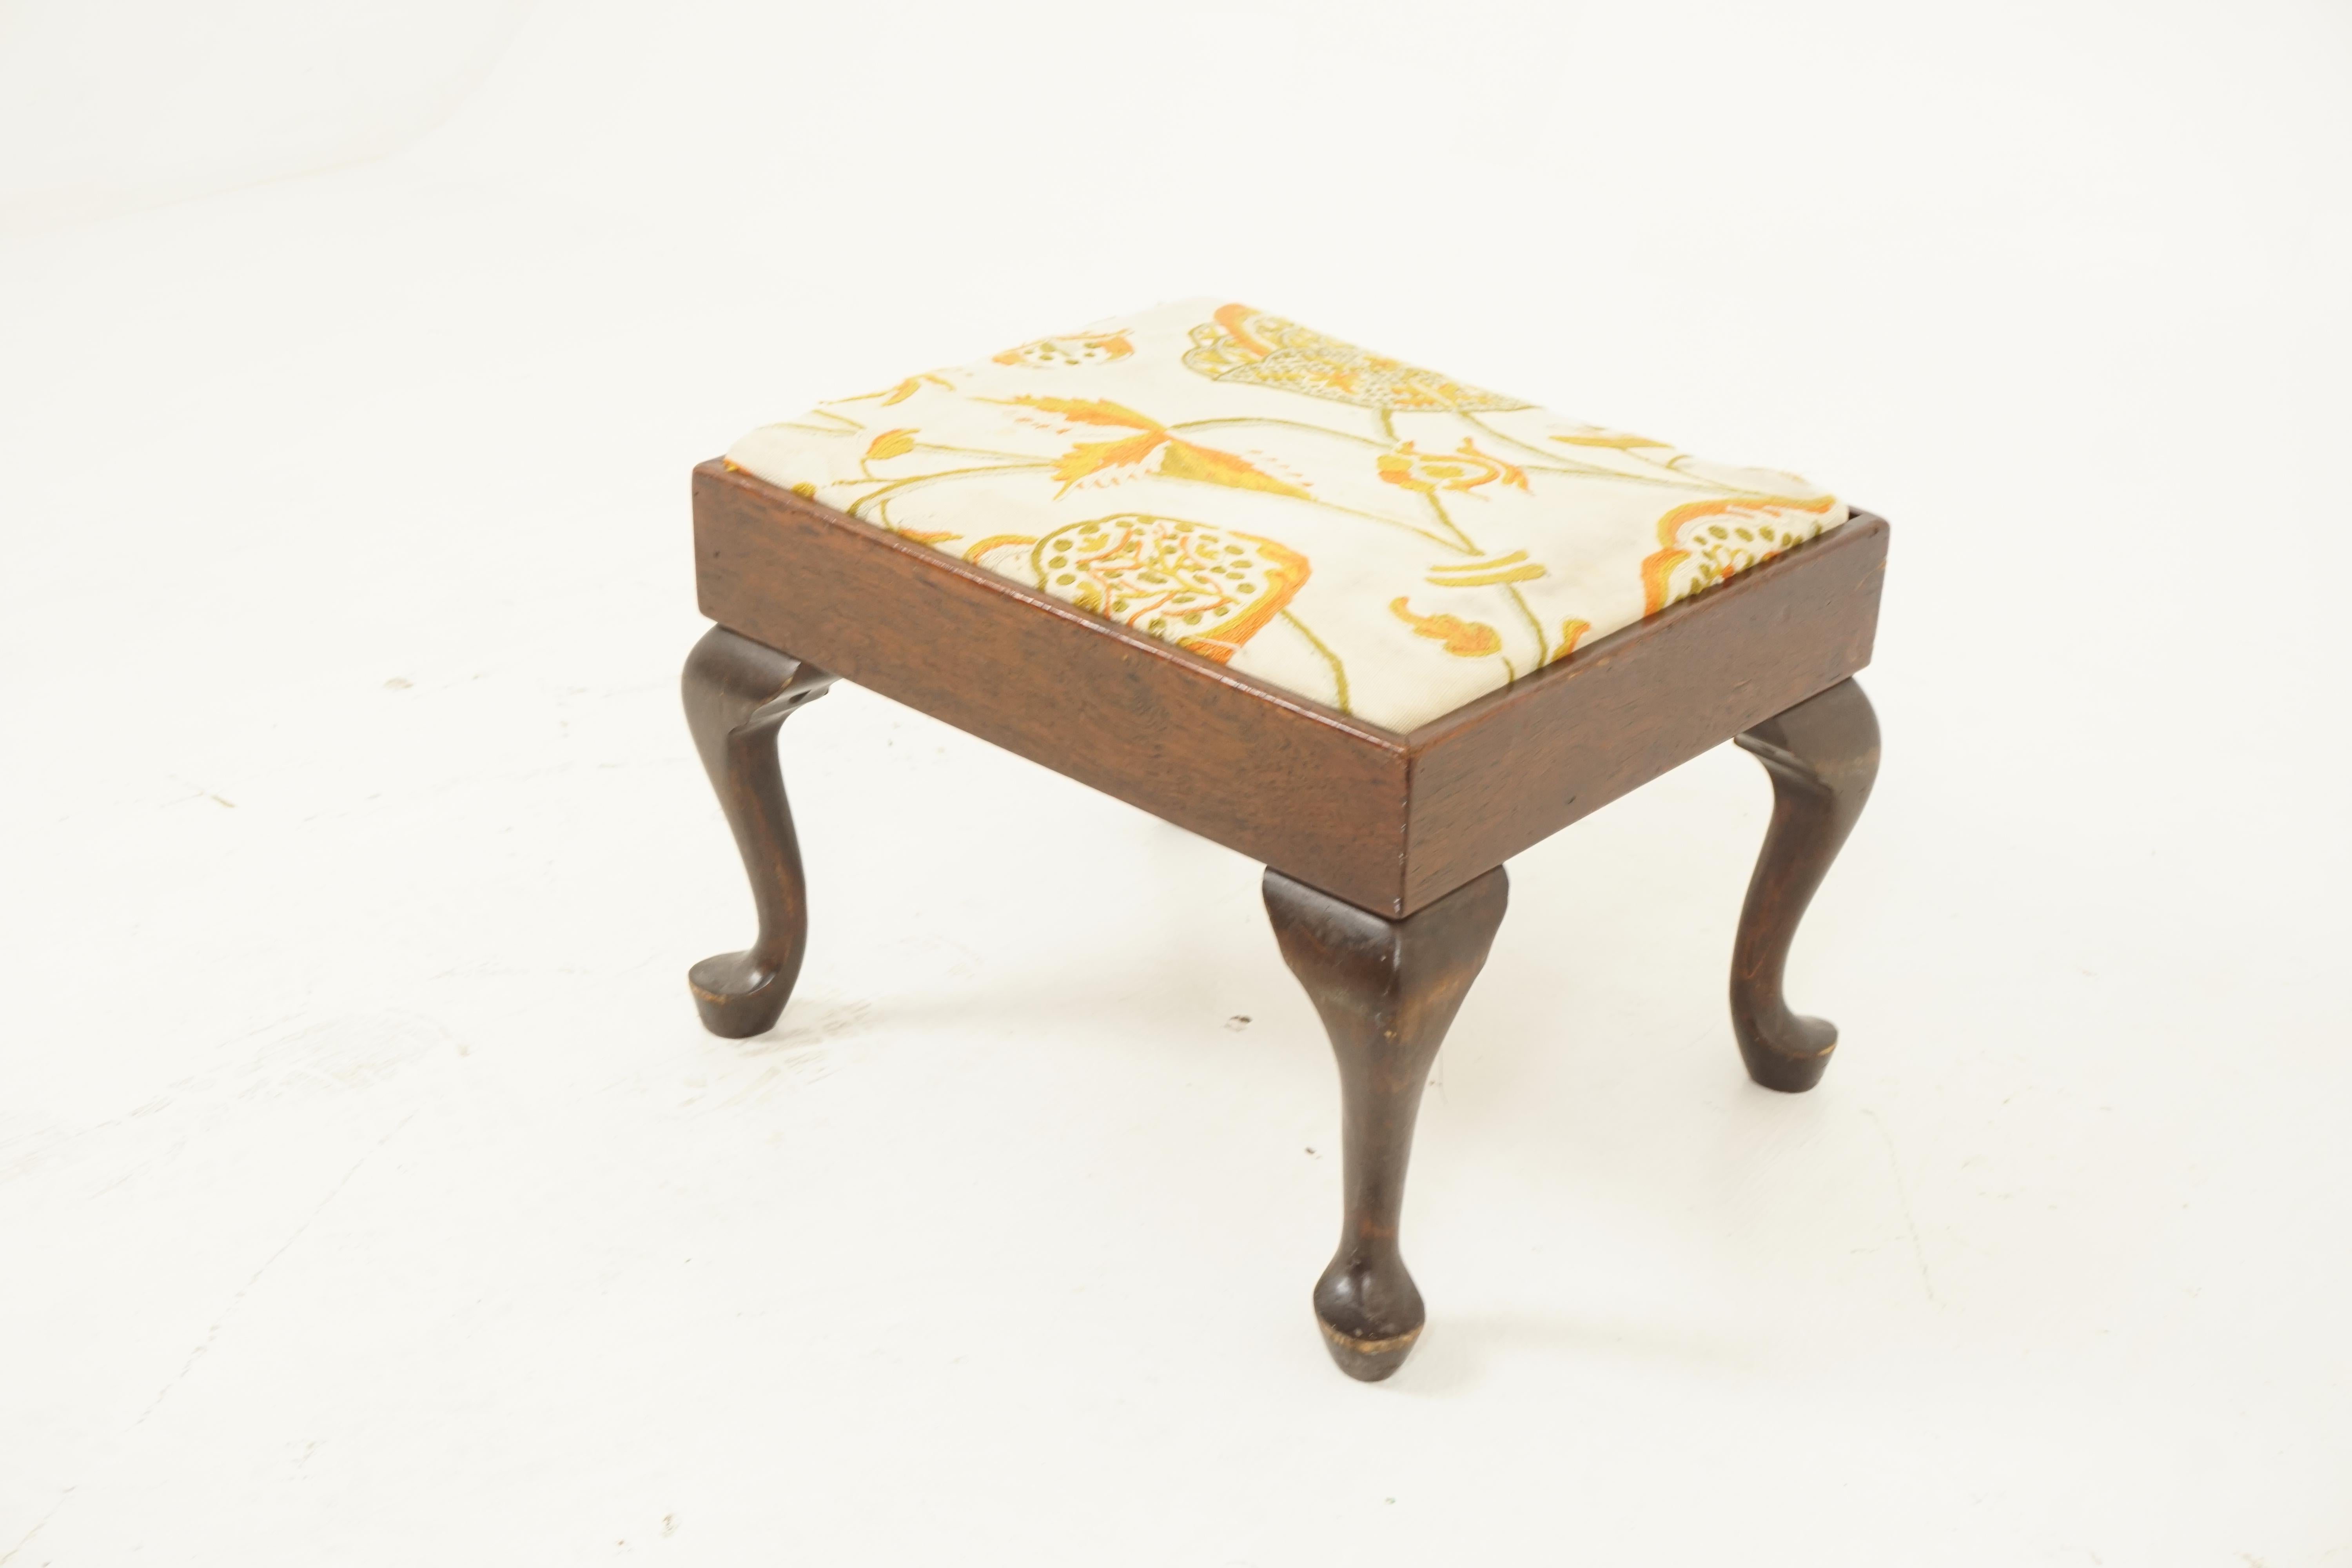 Vintage walnut Queen Anne style upholstered stool, Scotland 1920, B2713

Scotland 1920
Solid walnut
Original finish
Having an upholstered lift out seat
With a walnut frieze and standing on short cabriole legs
All joints are tight, very